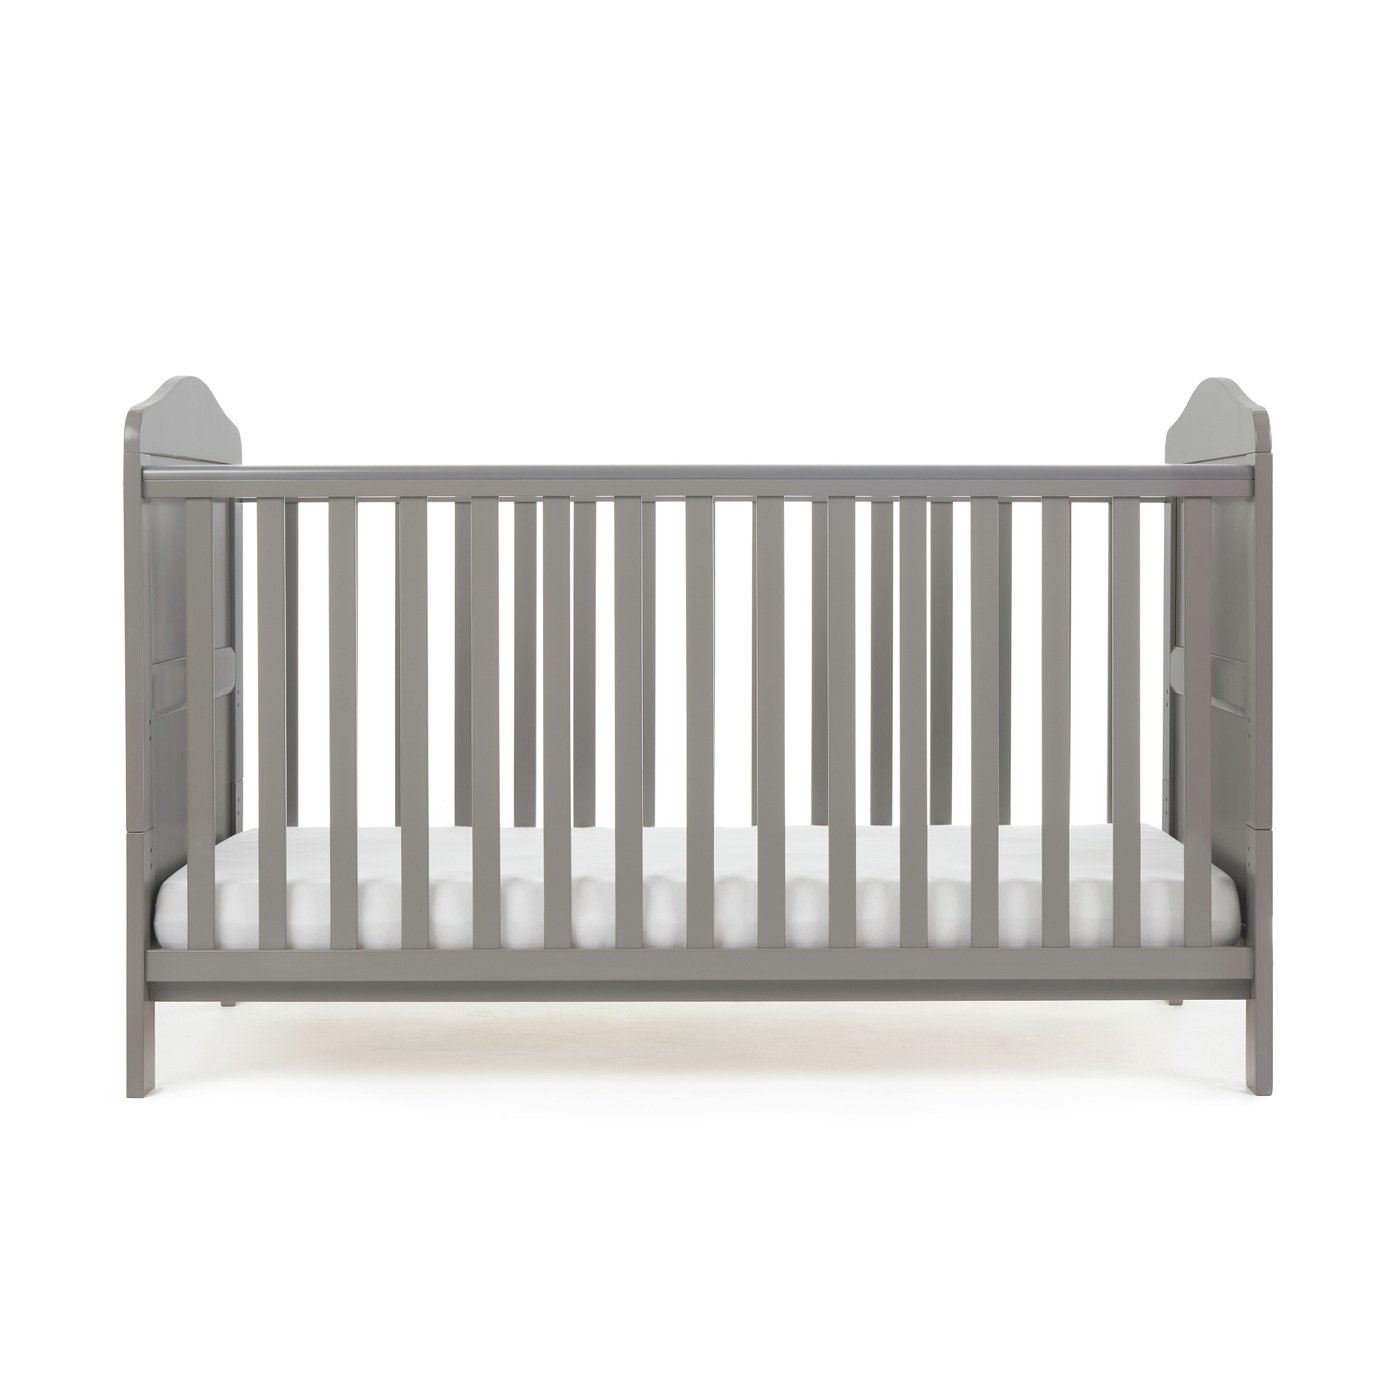 Obaby Whitby Baby Cot Bed Review